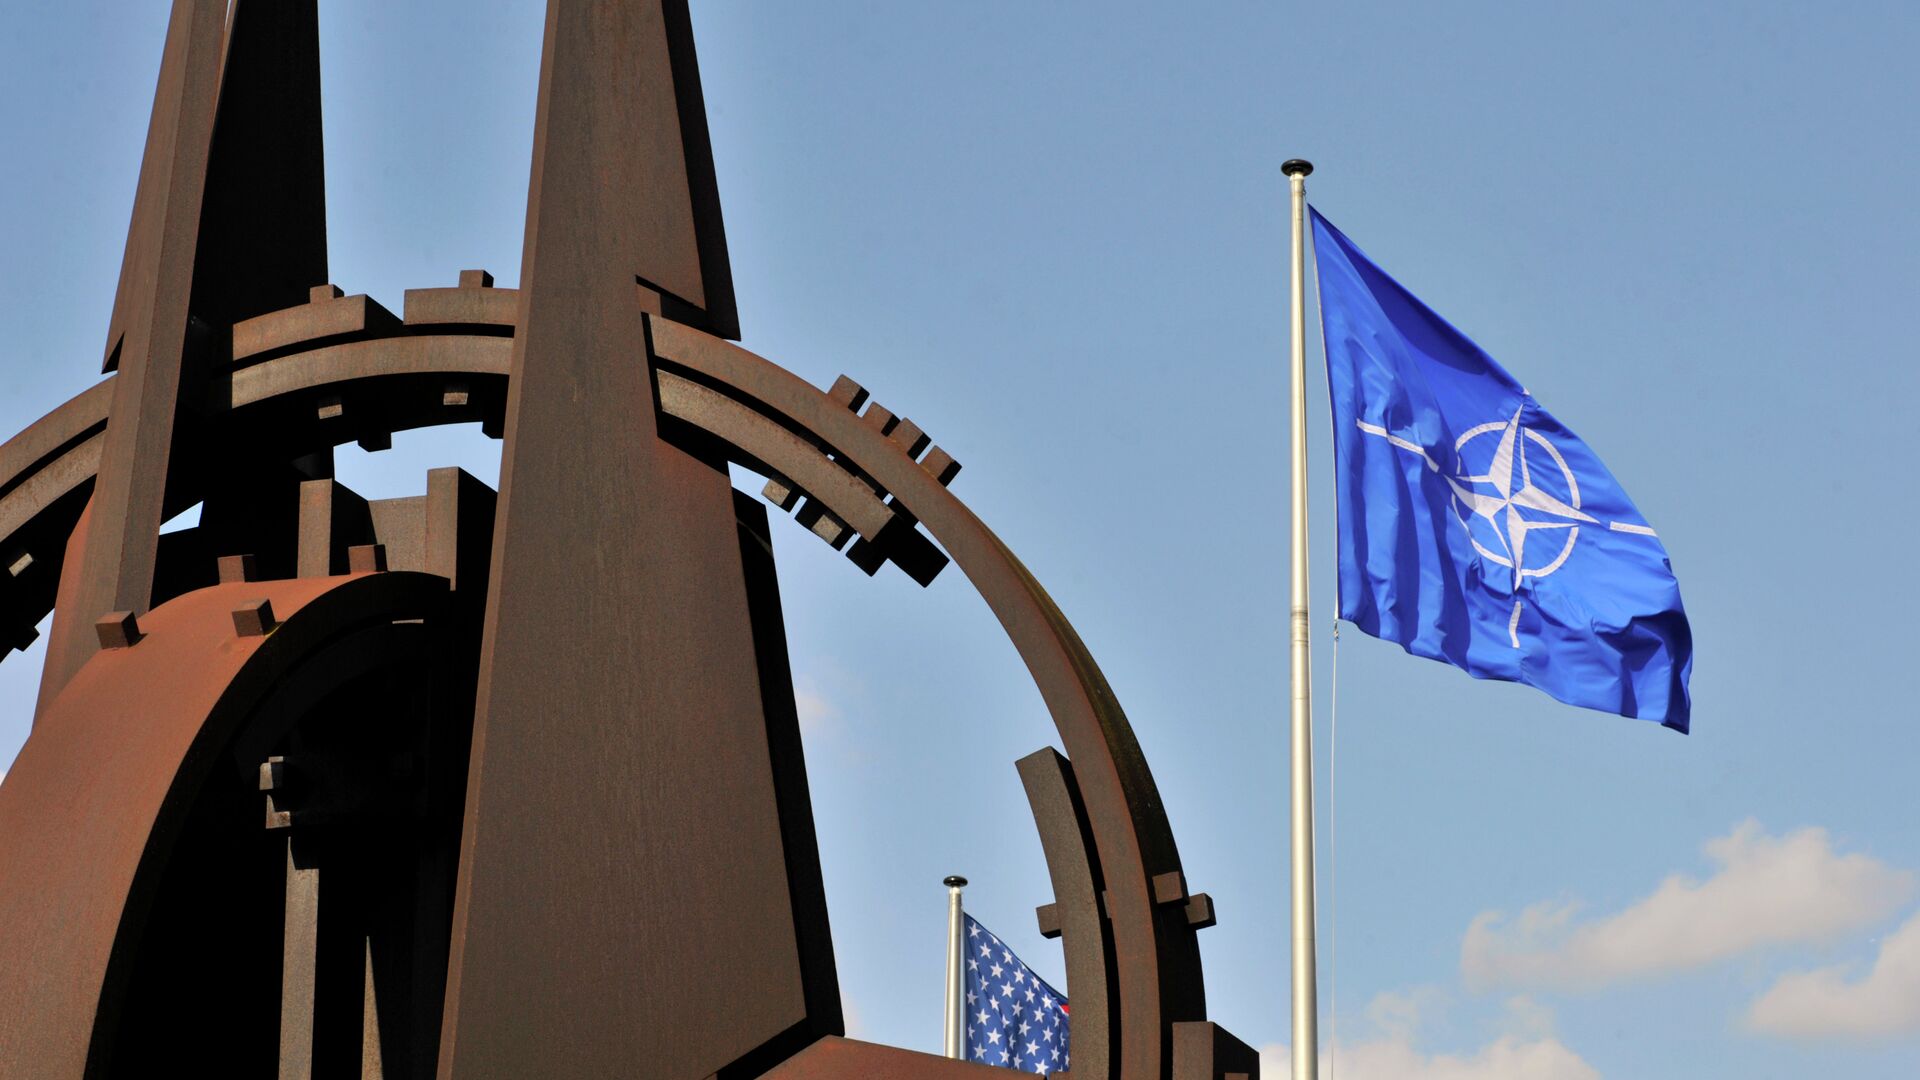 NATO flag in the wind at the NATO headquarters in Brussels. (File) - Sputnik International, 1920, 28.03.2022